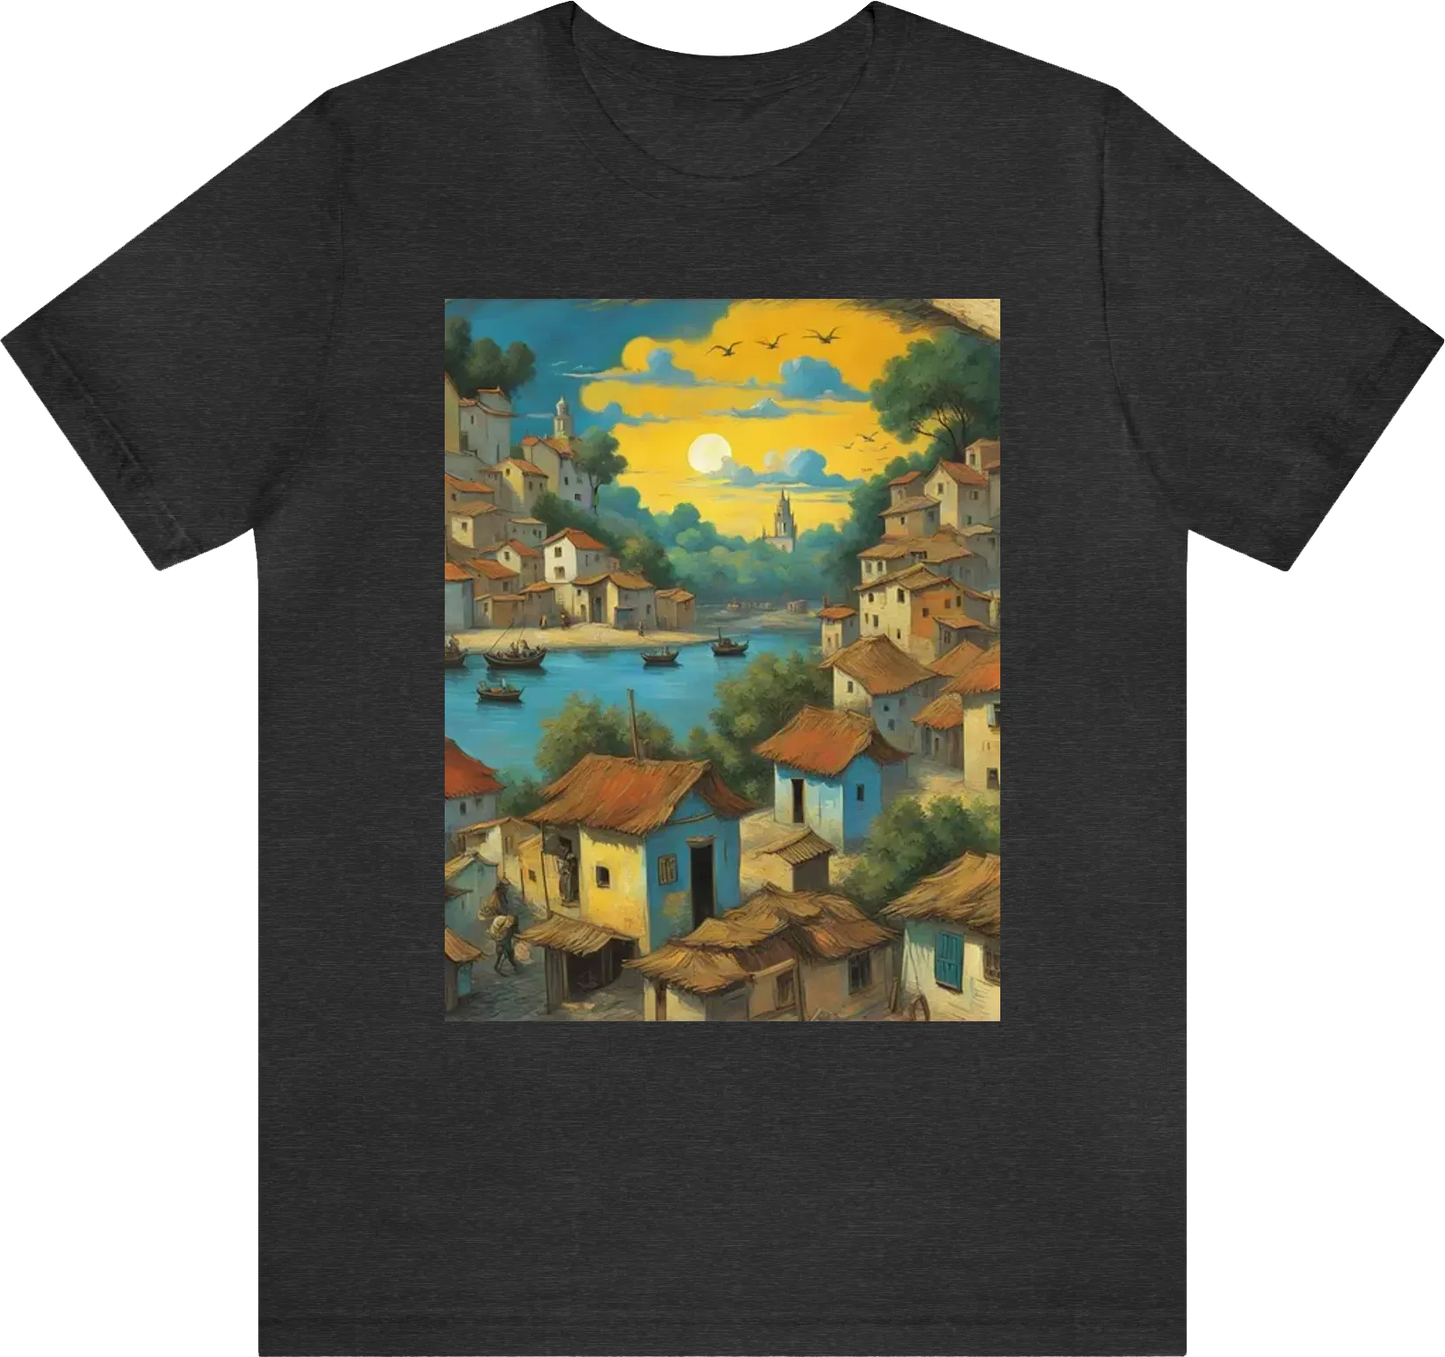 Create a vincent van gogh art style t shirt with the slums of Jamaica